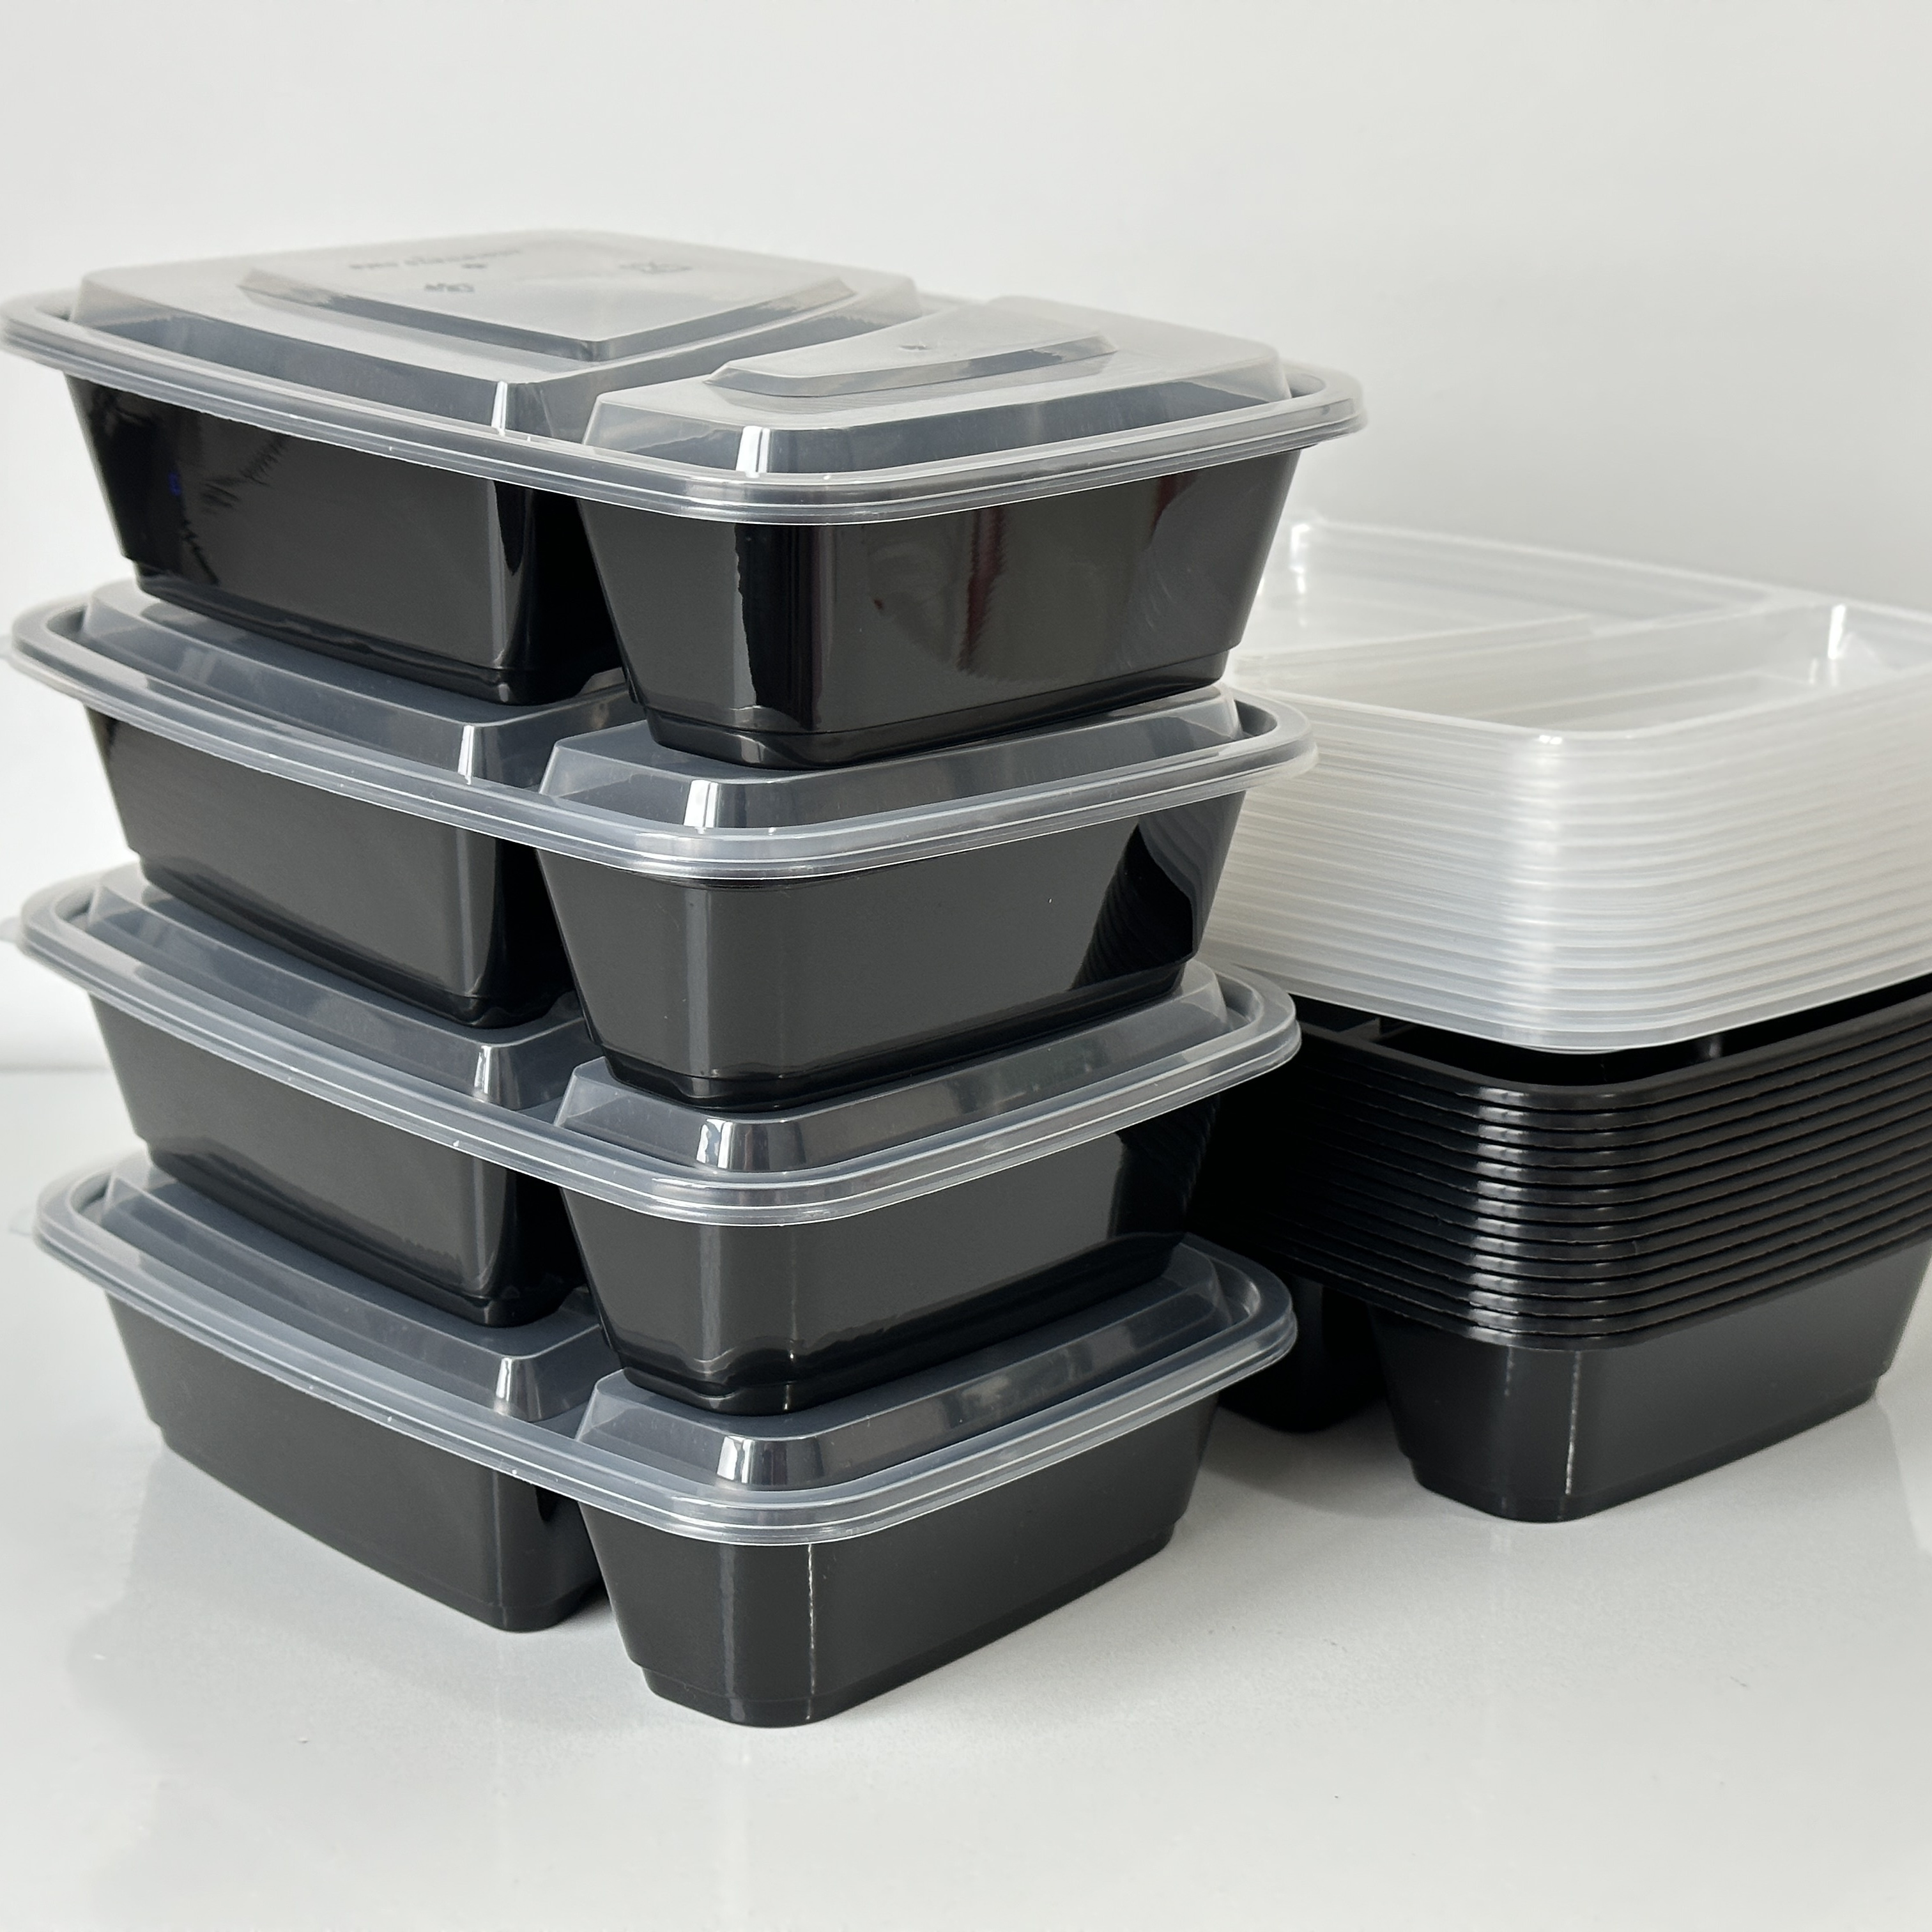 Cheer Collection Set of 8 28oz Airtight Food Storage Containers (Black)